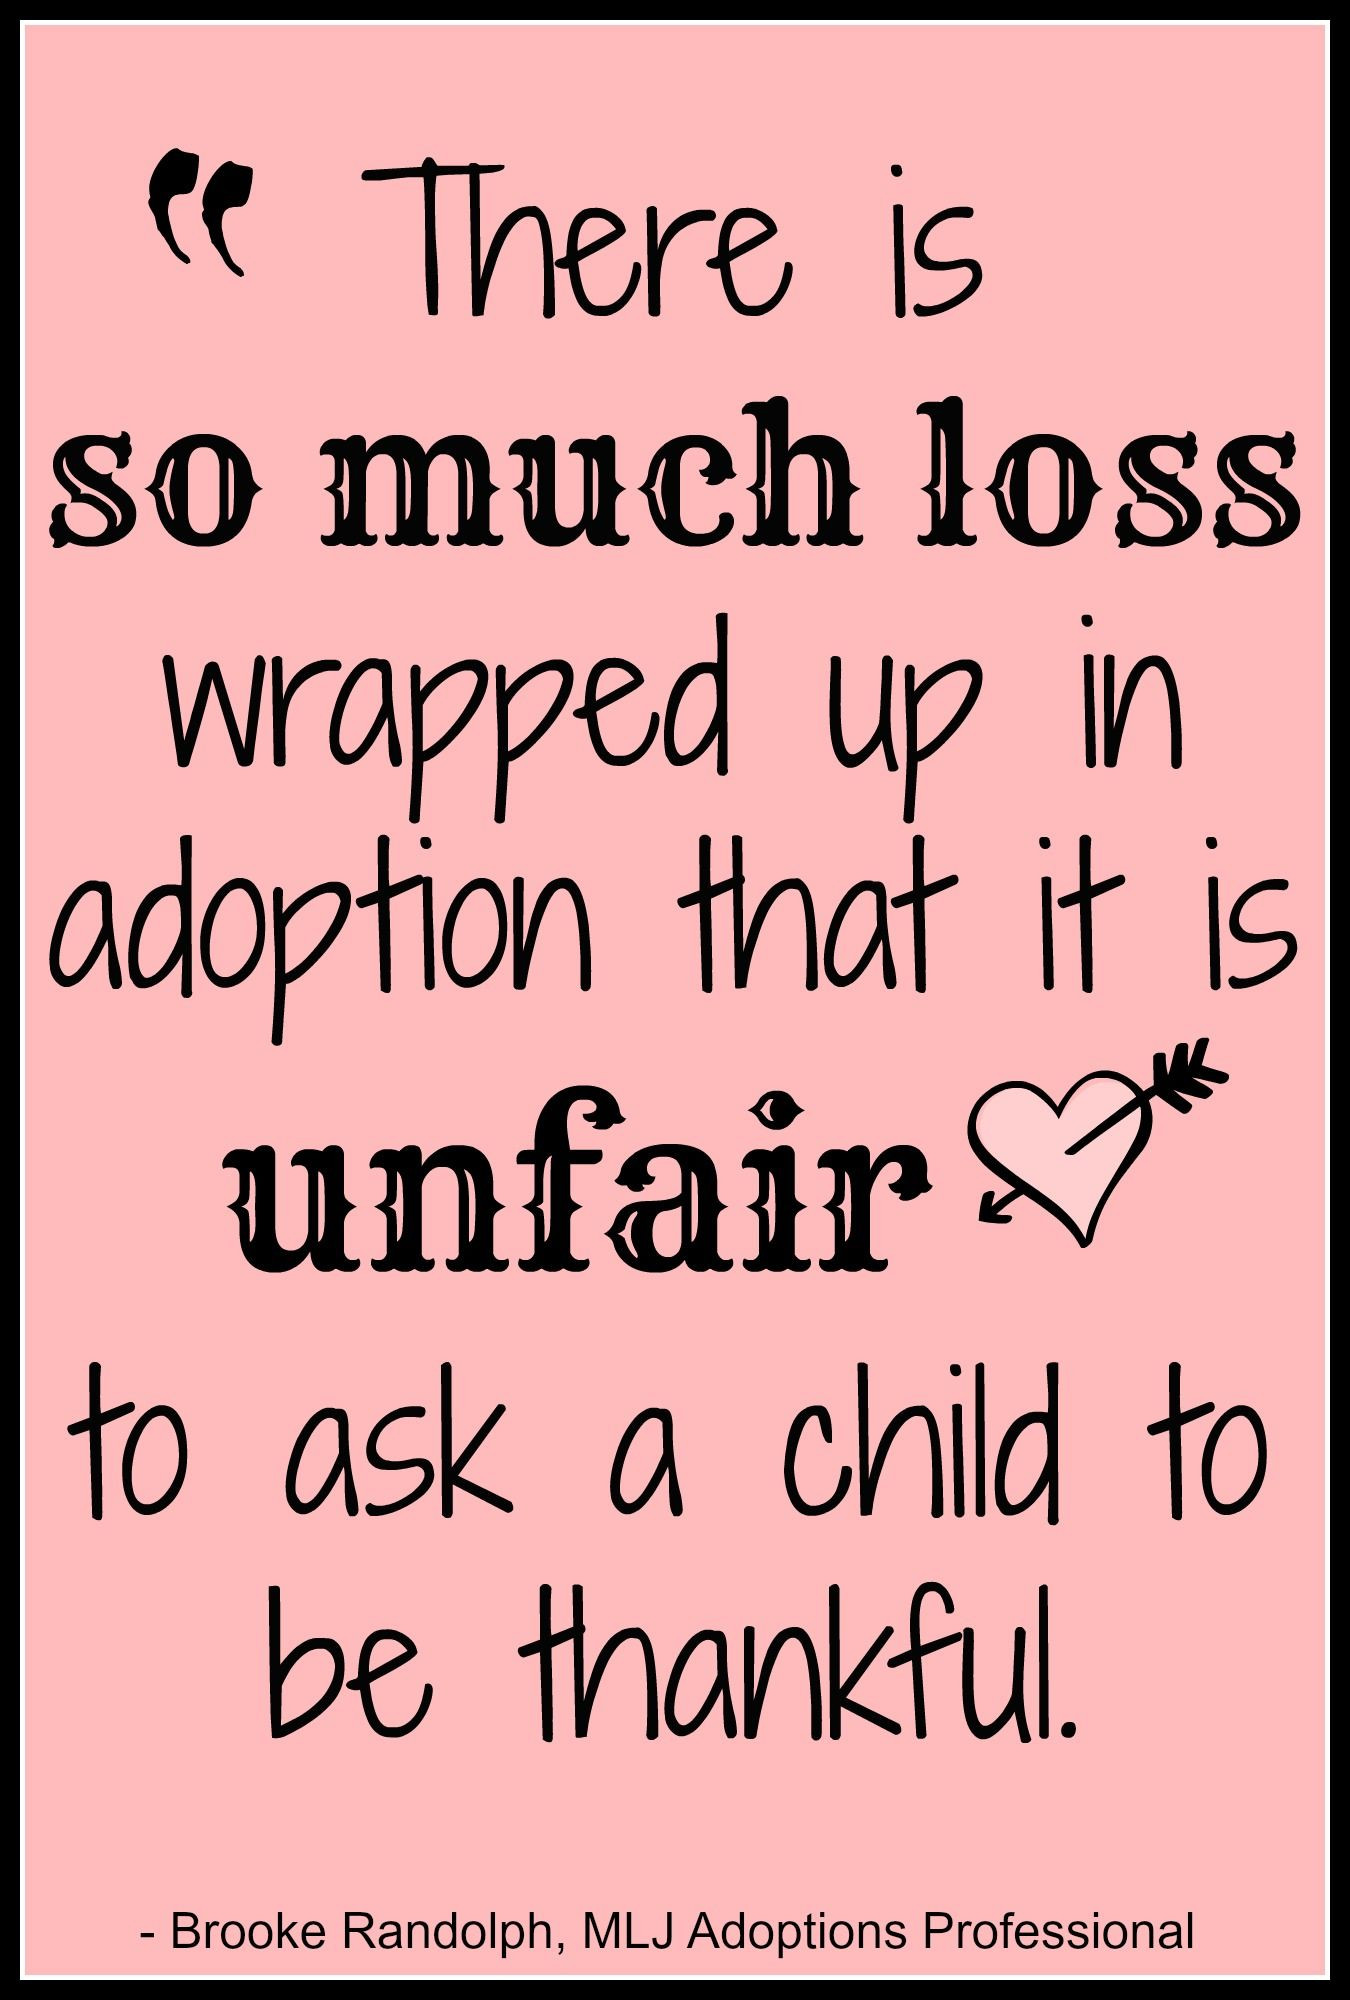 Adopted Child Quotes
 Quotes About Being Adopted QuotesGram